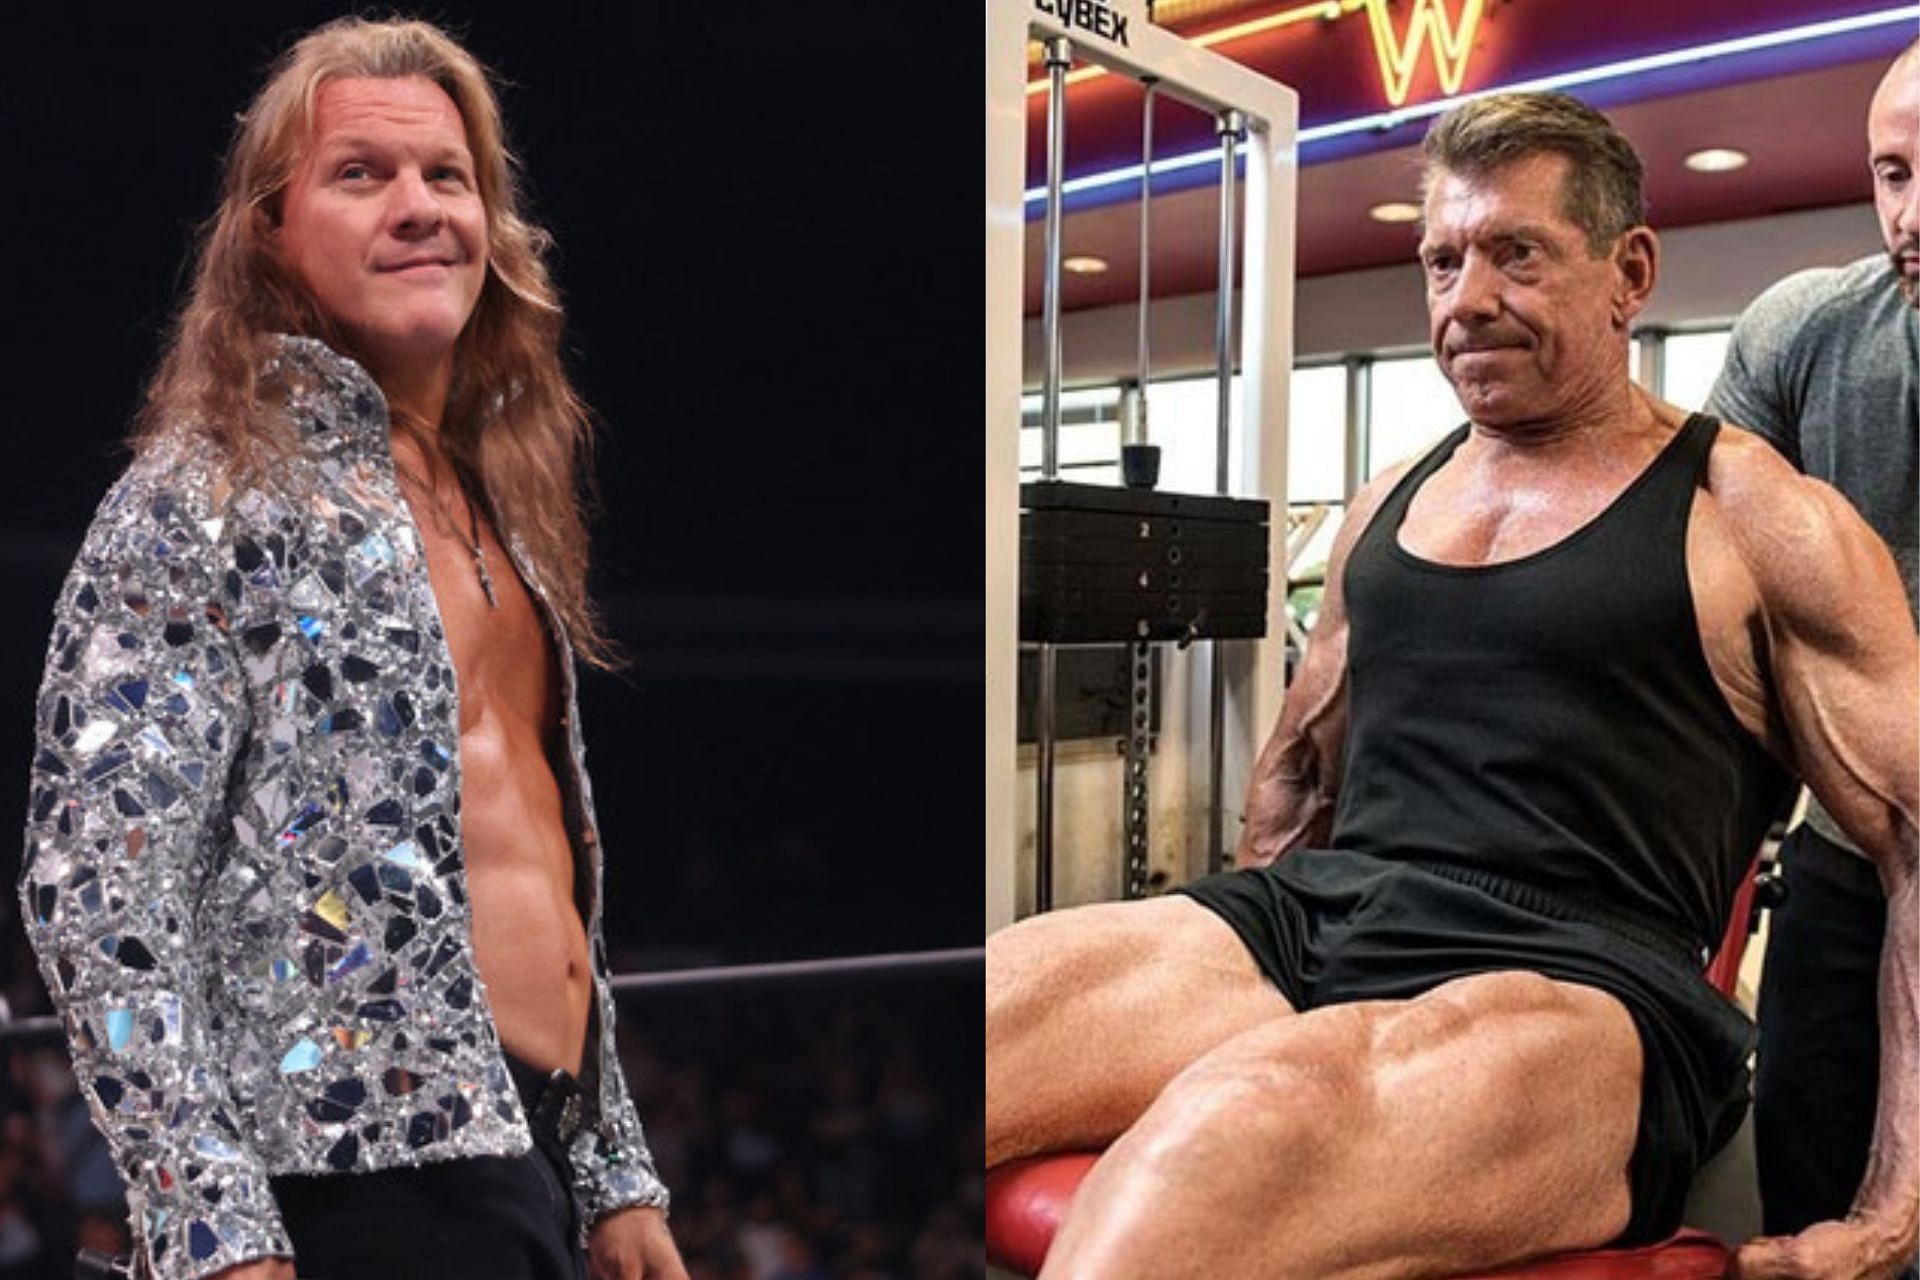 Chris Jericho says he pitched an idea to Vince McMahon